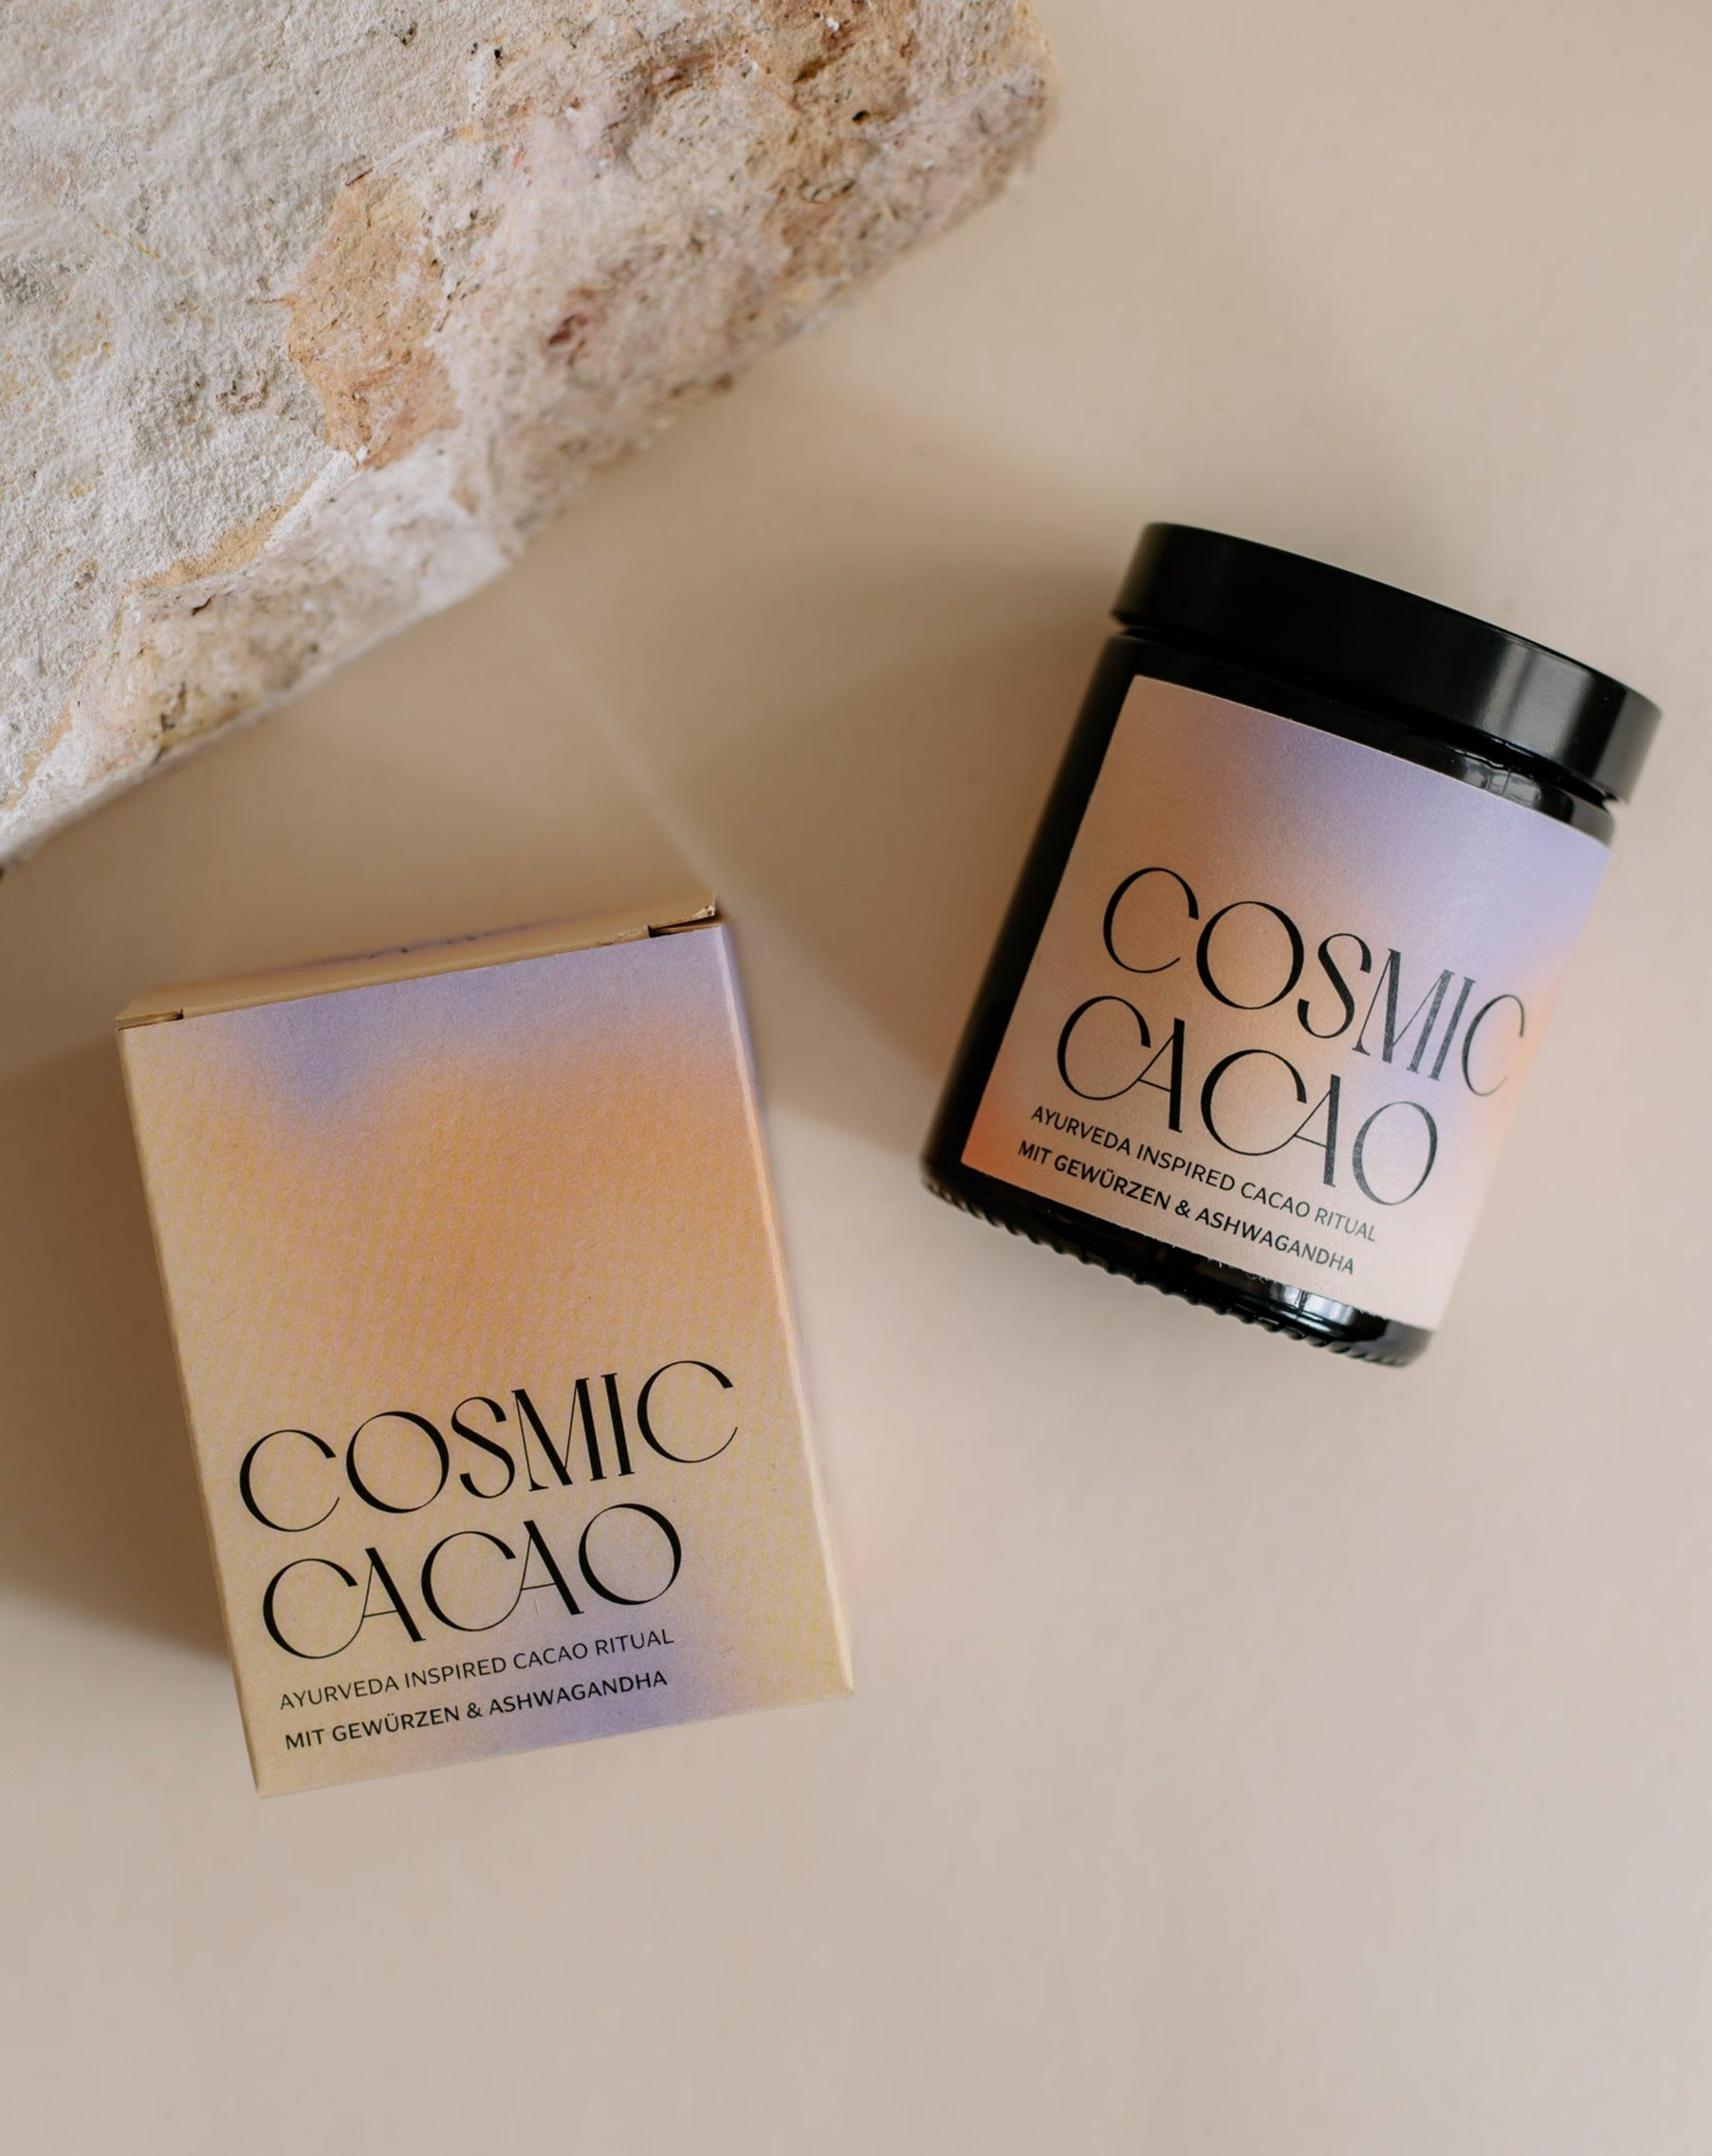 Cosmic Cacao by Ayurveda Soulfood 